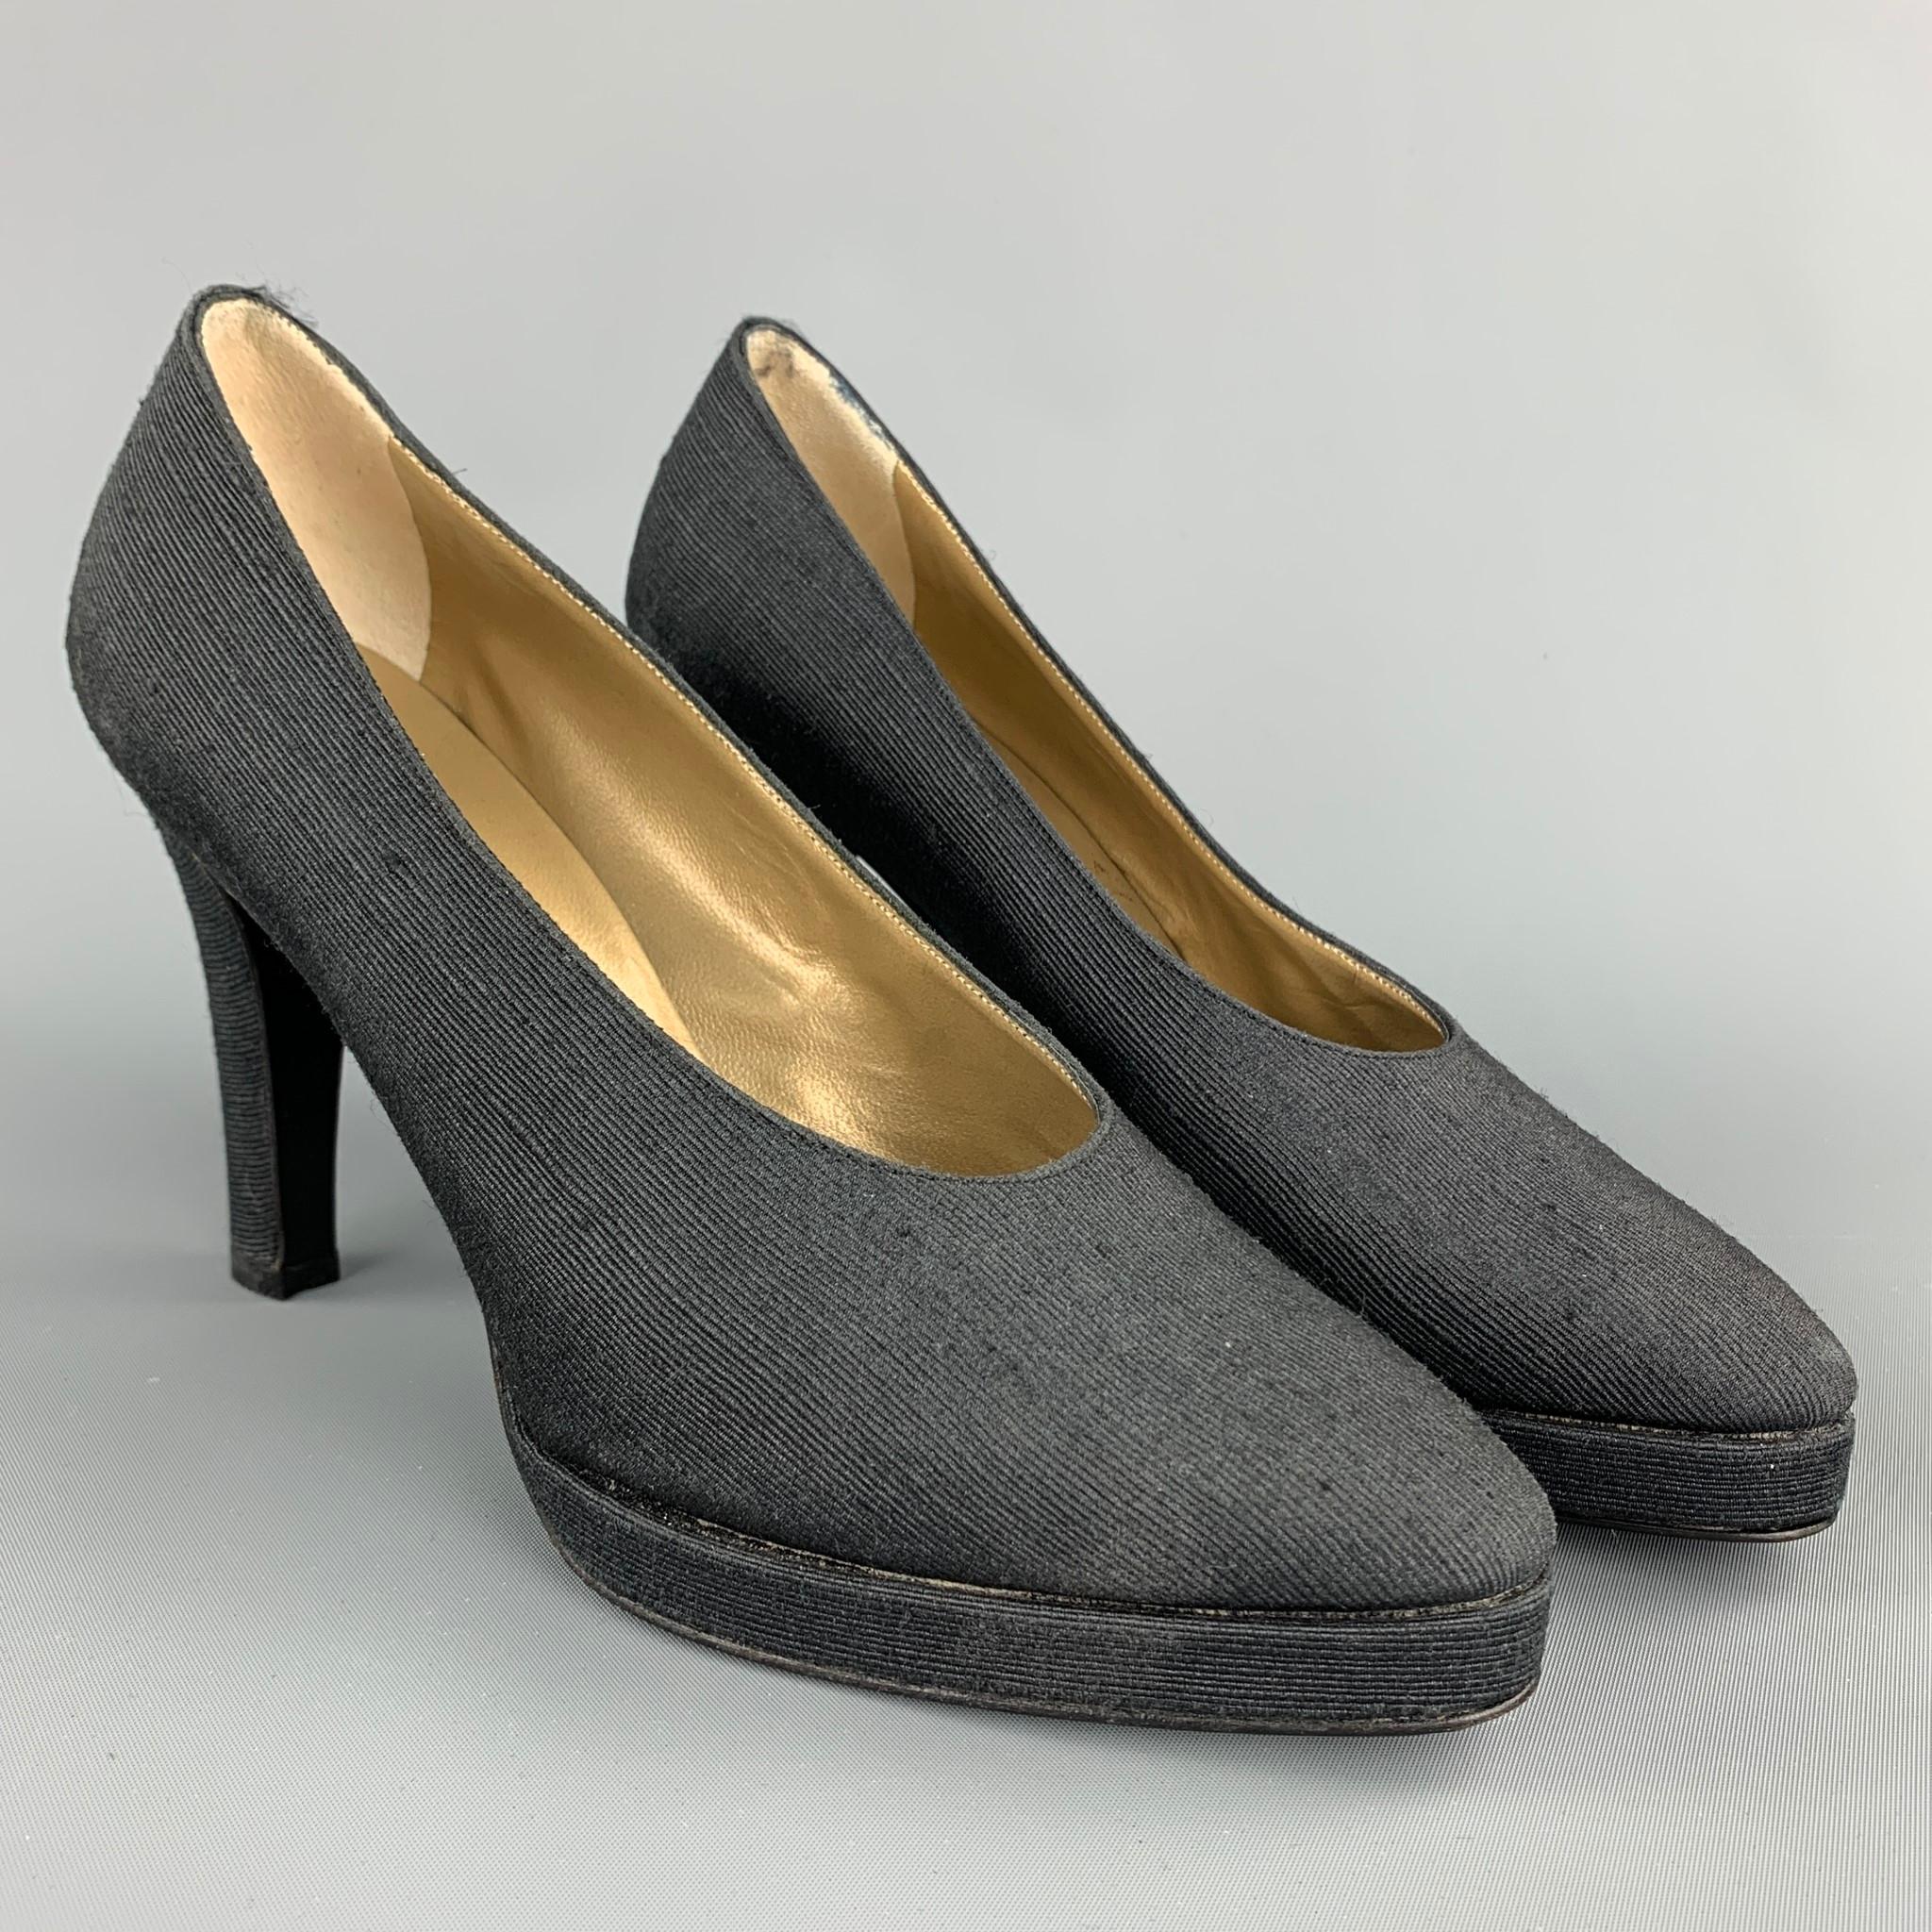 YVES SAINT LAURENT pumps comes in a black textured fabric featuring a platform style, stacked heel, and a wooden sole. Made in Italy.

Very Good Pre-Owned Condition.
Marked: 7 M

Measurements:

Heel: 4 in.
Platform: 0.5 in. 